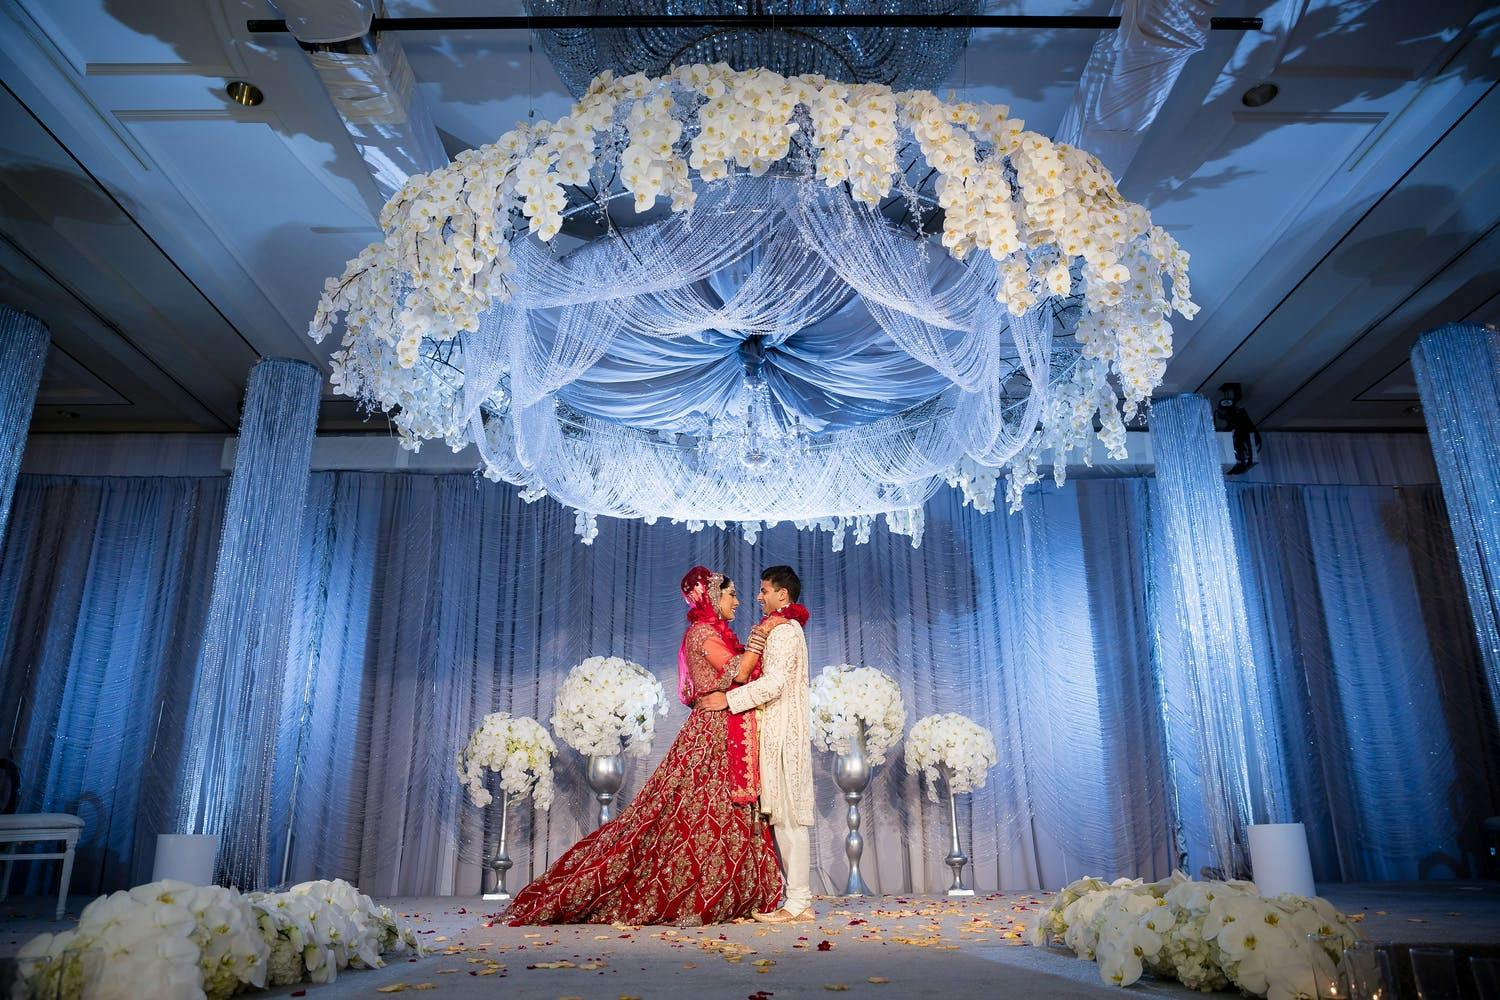 Bride and groom underneath ethereal ceiling installation of shimmering tassels and white orchids and blue uplighting at Indian Wedding | PartySlate